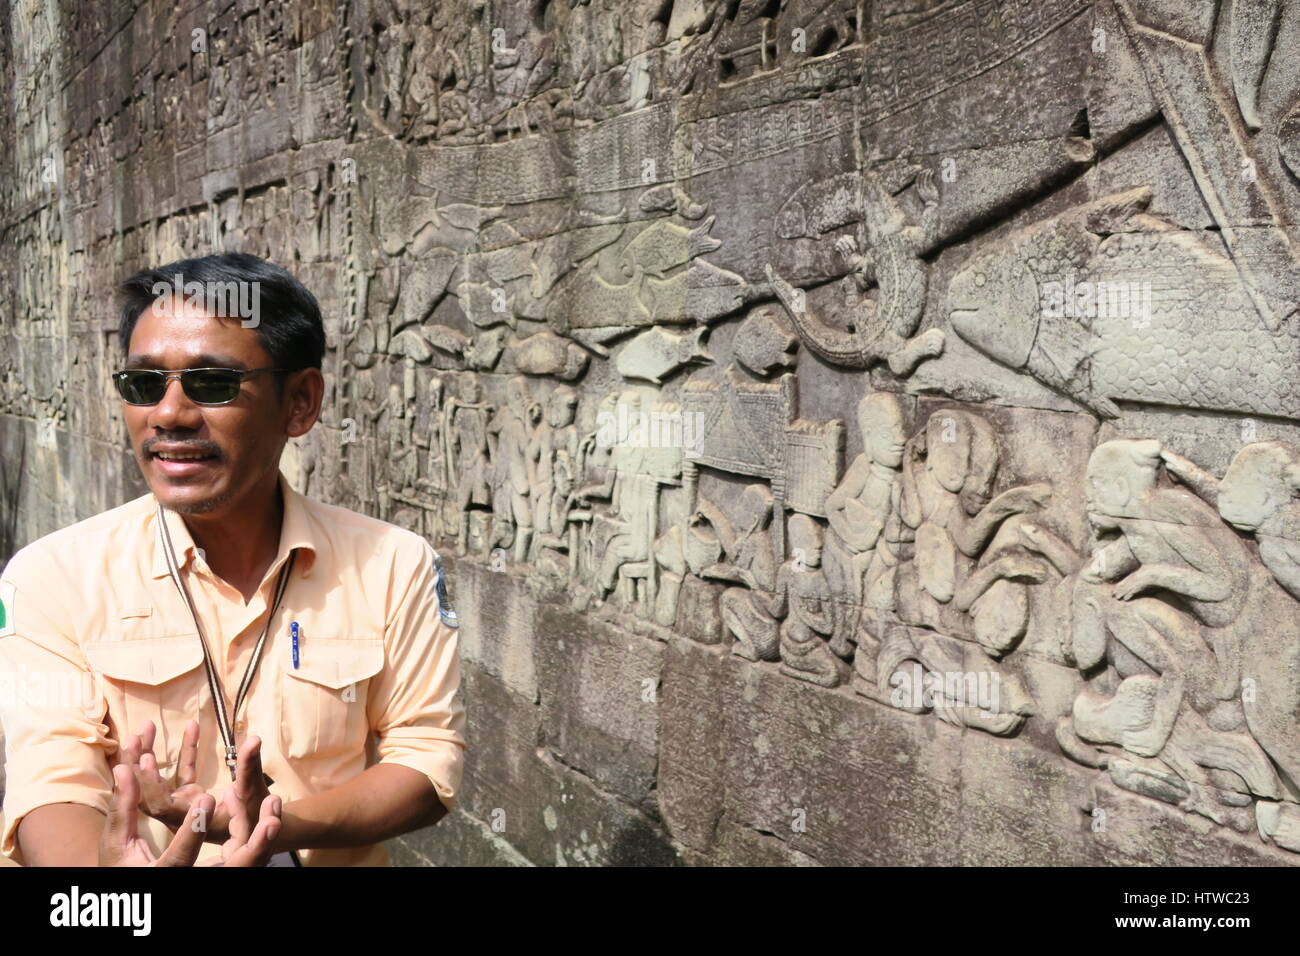 Angkor Thom was the last and most enduring capital city of Khmer empire. Lots of nice bed-reliefs on walls Stock Photo